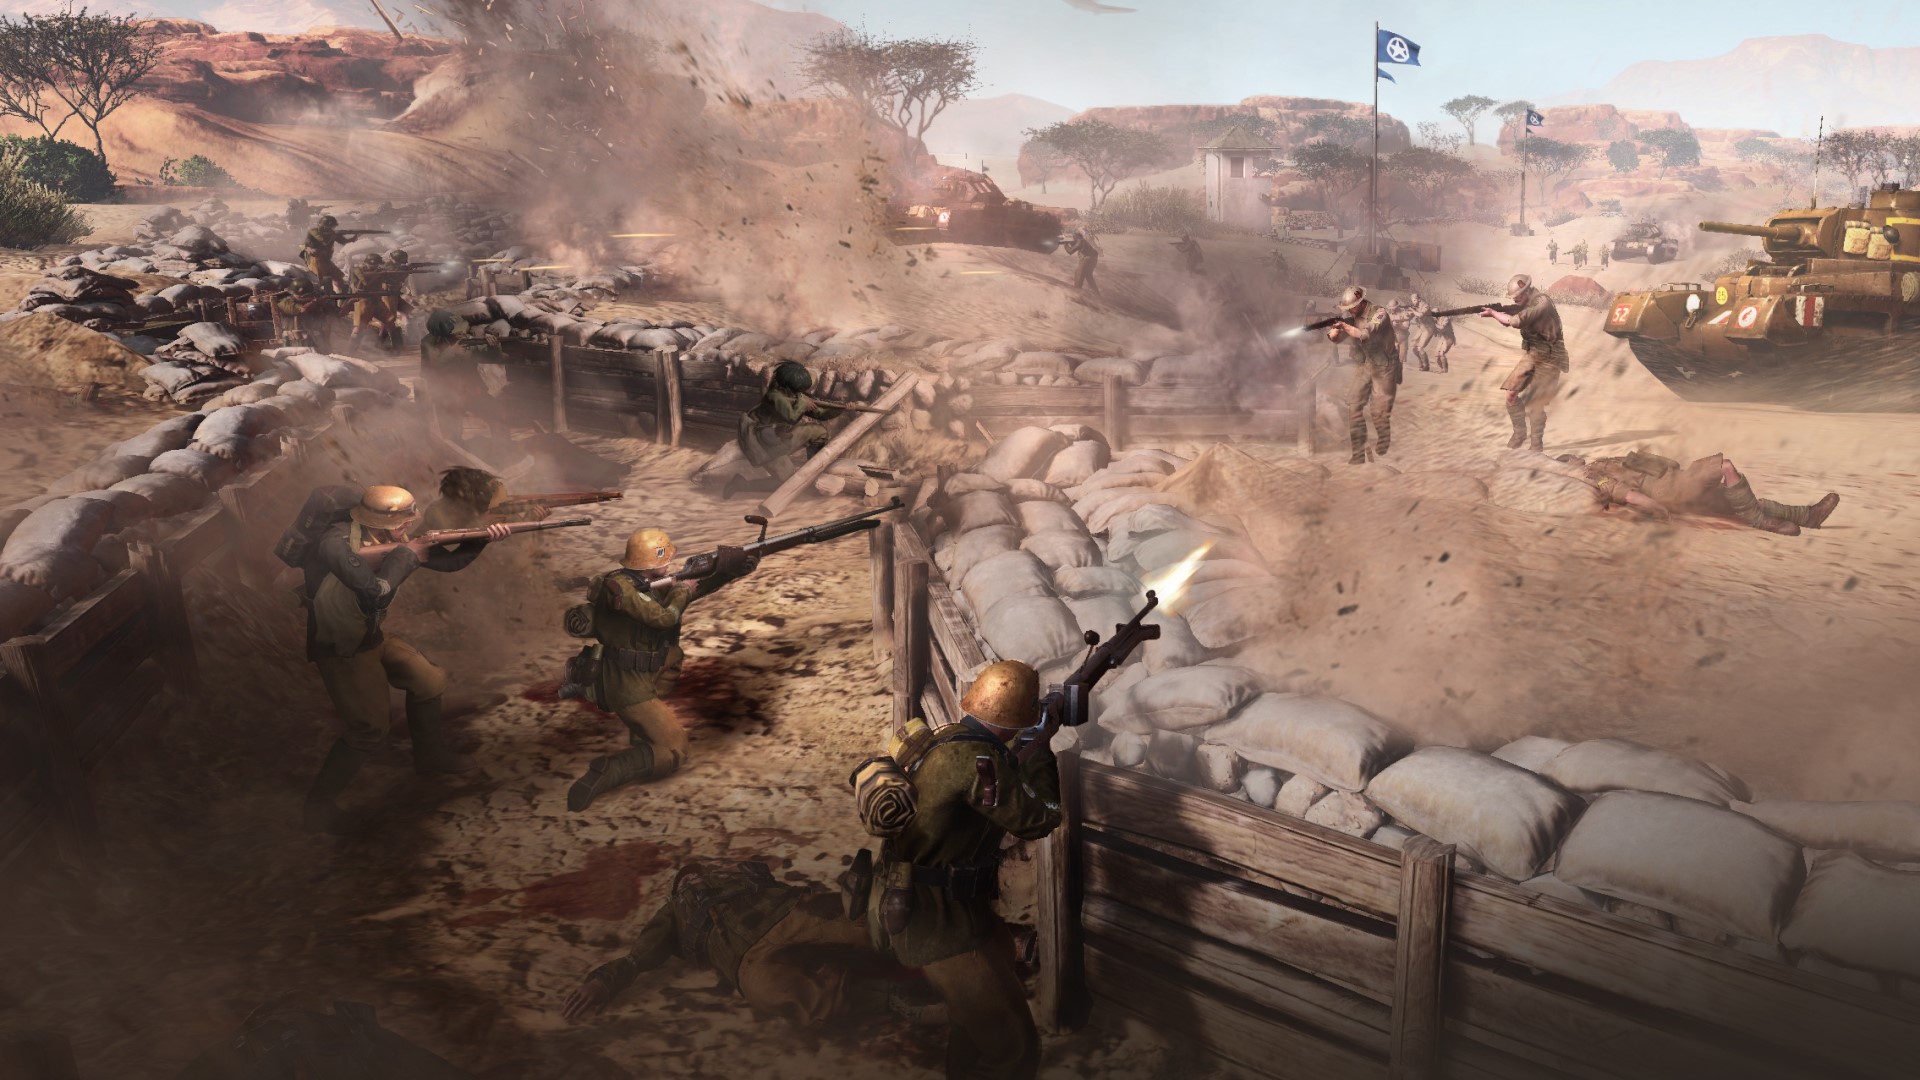 Company of Heroes 3 Afrikakorps is its 